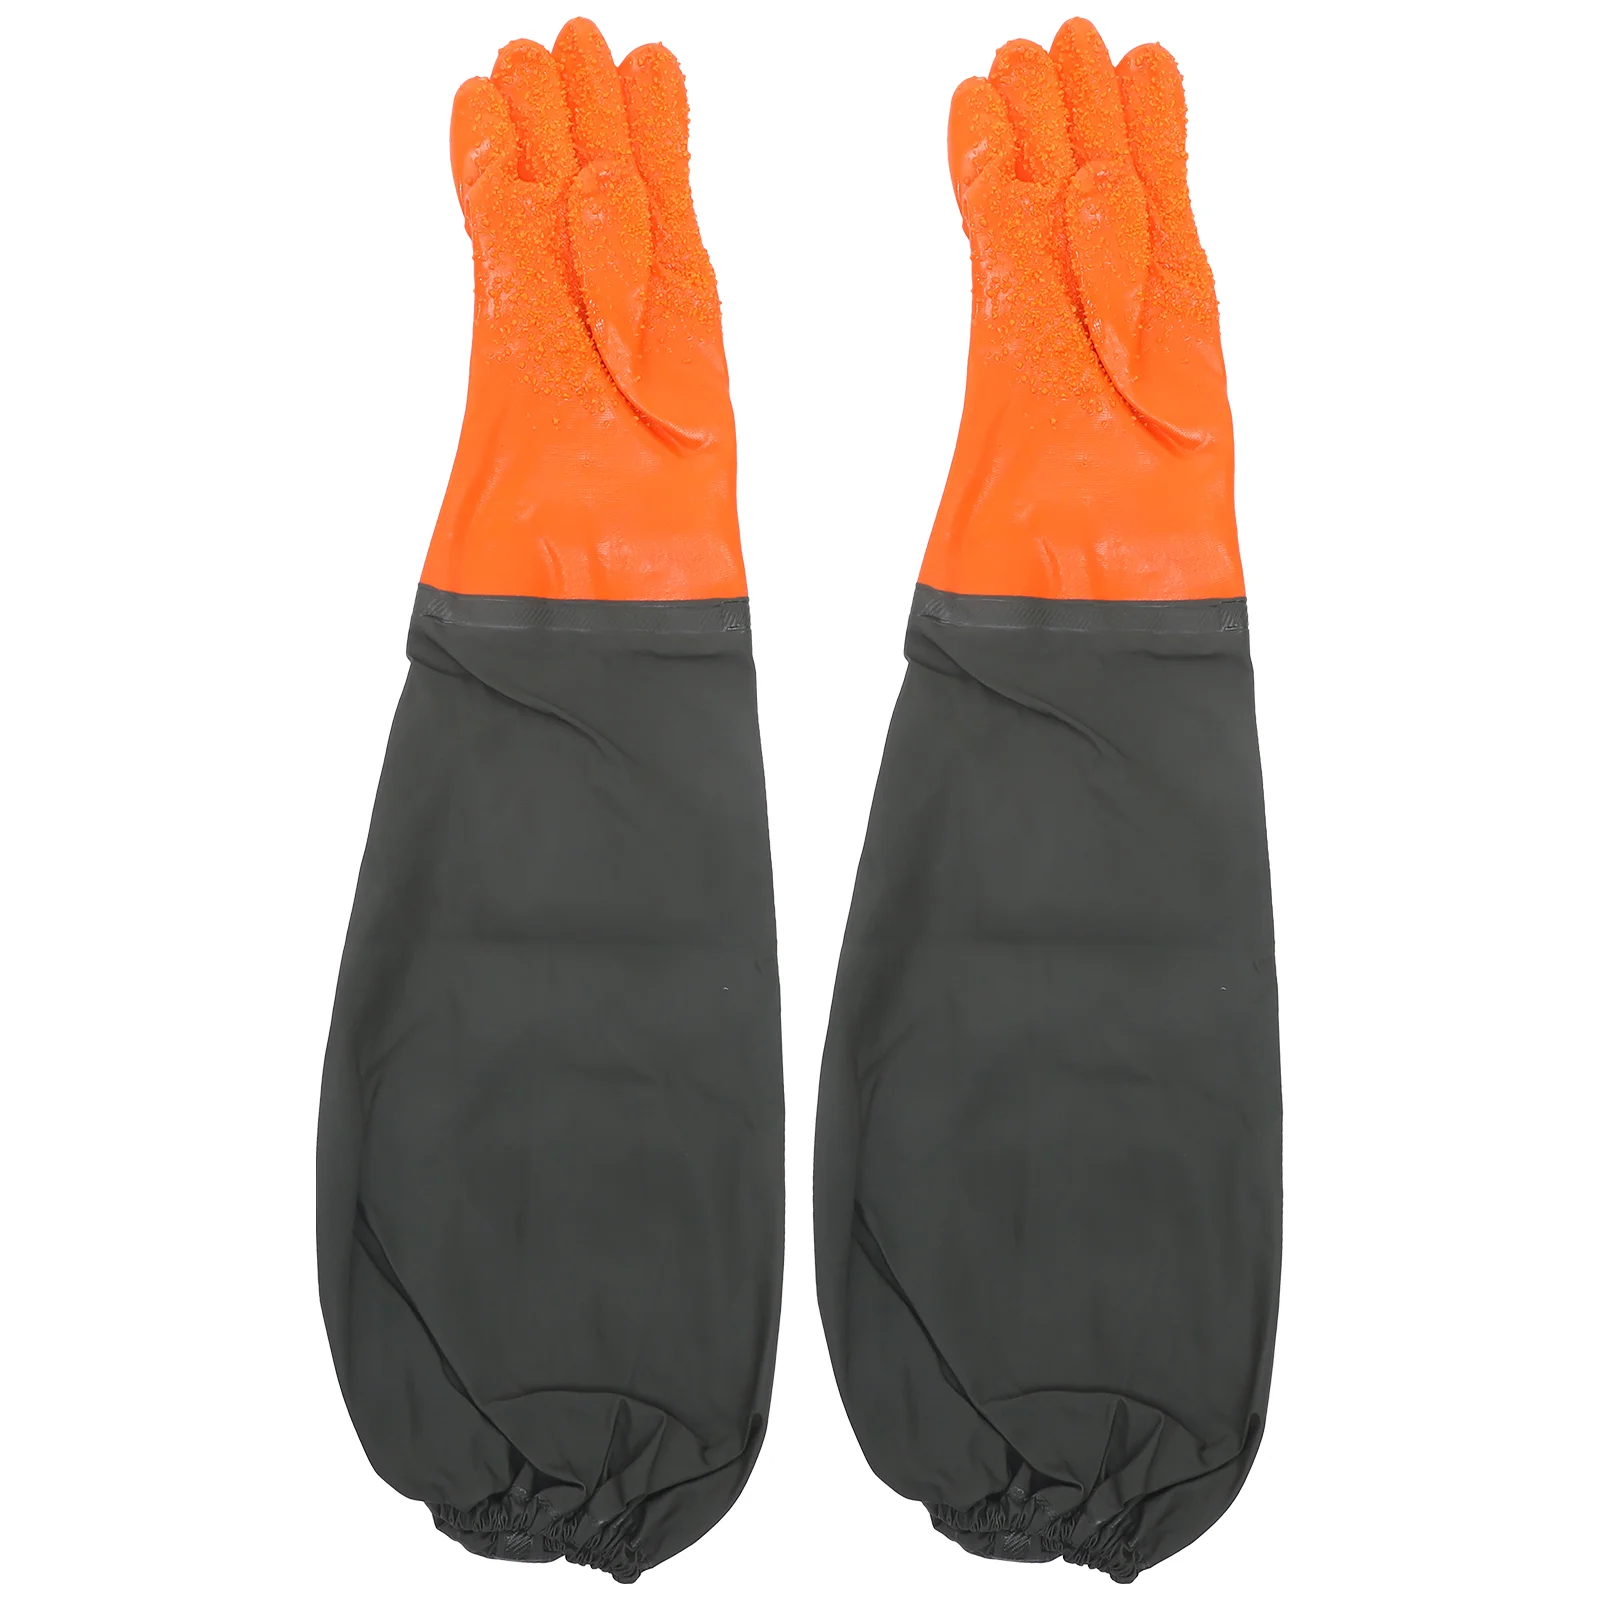 

Extra Water Proof Gloves Dishwashing Outdoor Planting Fishing Accessory Cleaning Professional Gardening Supply Men's